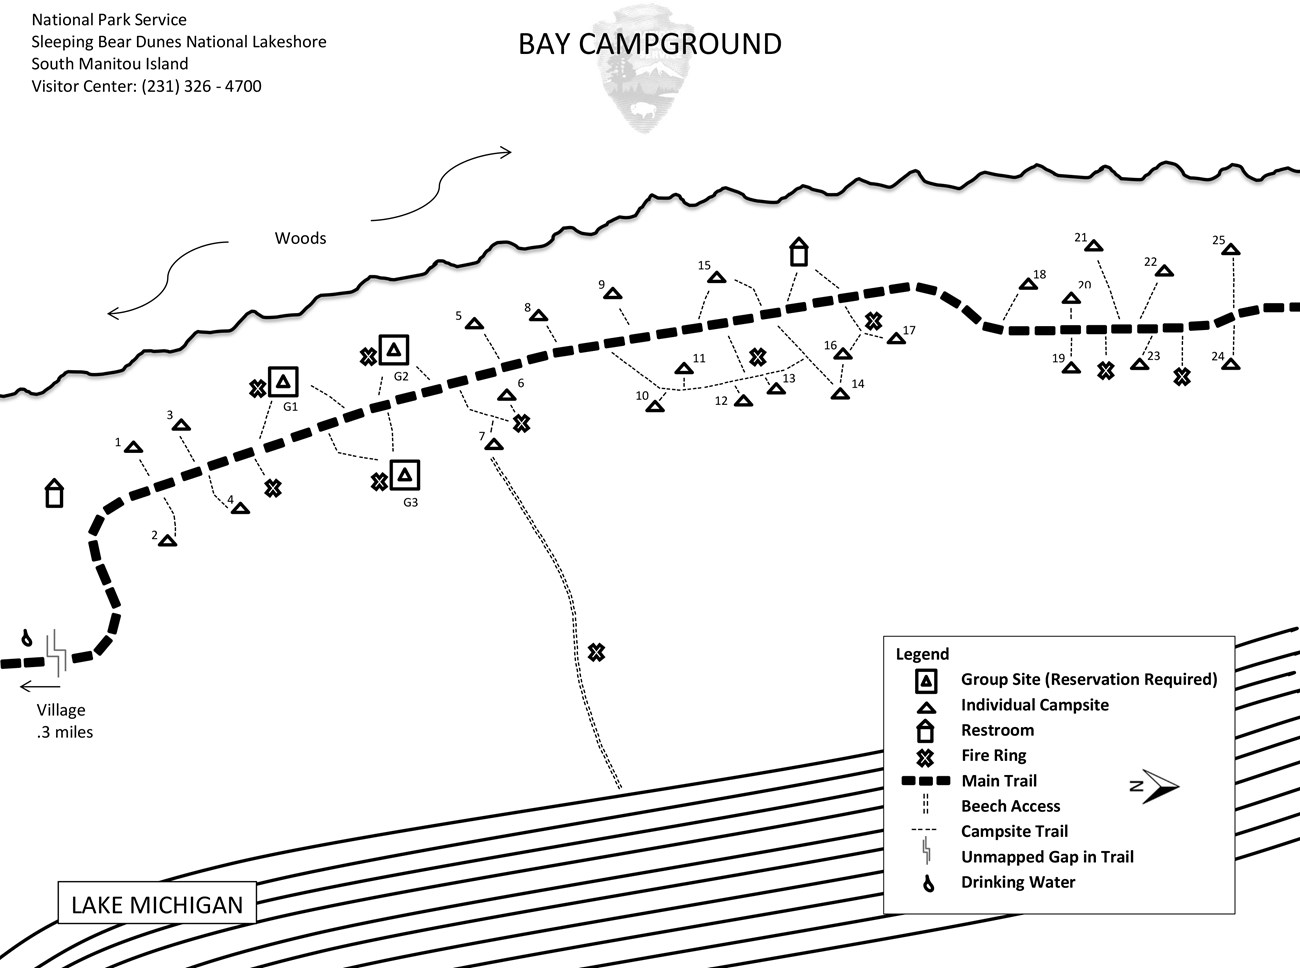 Bay campground map